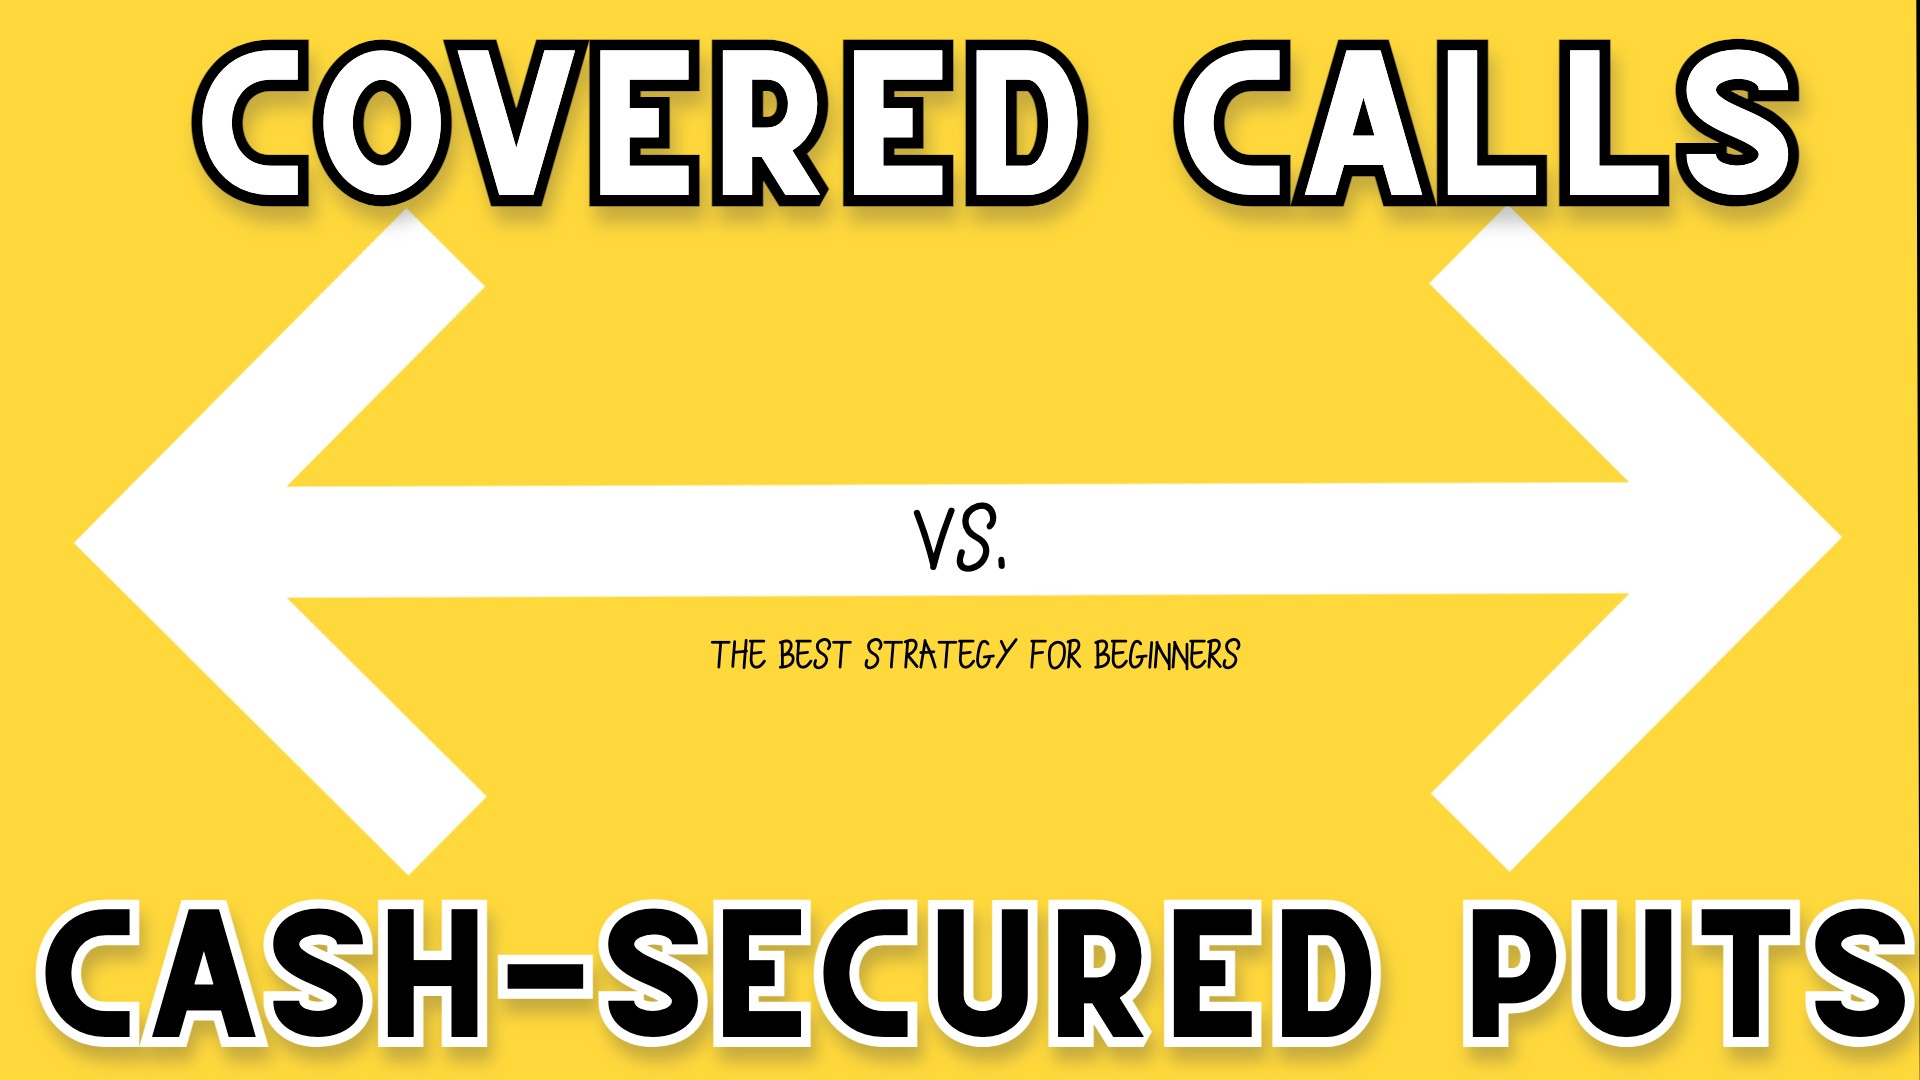 Covered Calls vs. Cash-Secured Puts: The Best Strategy for Beginners